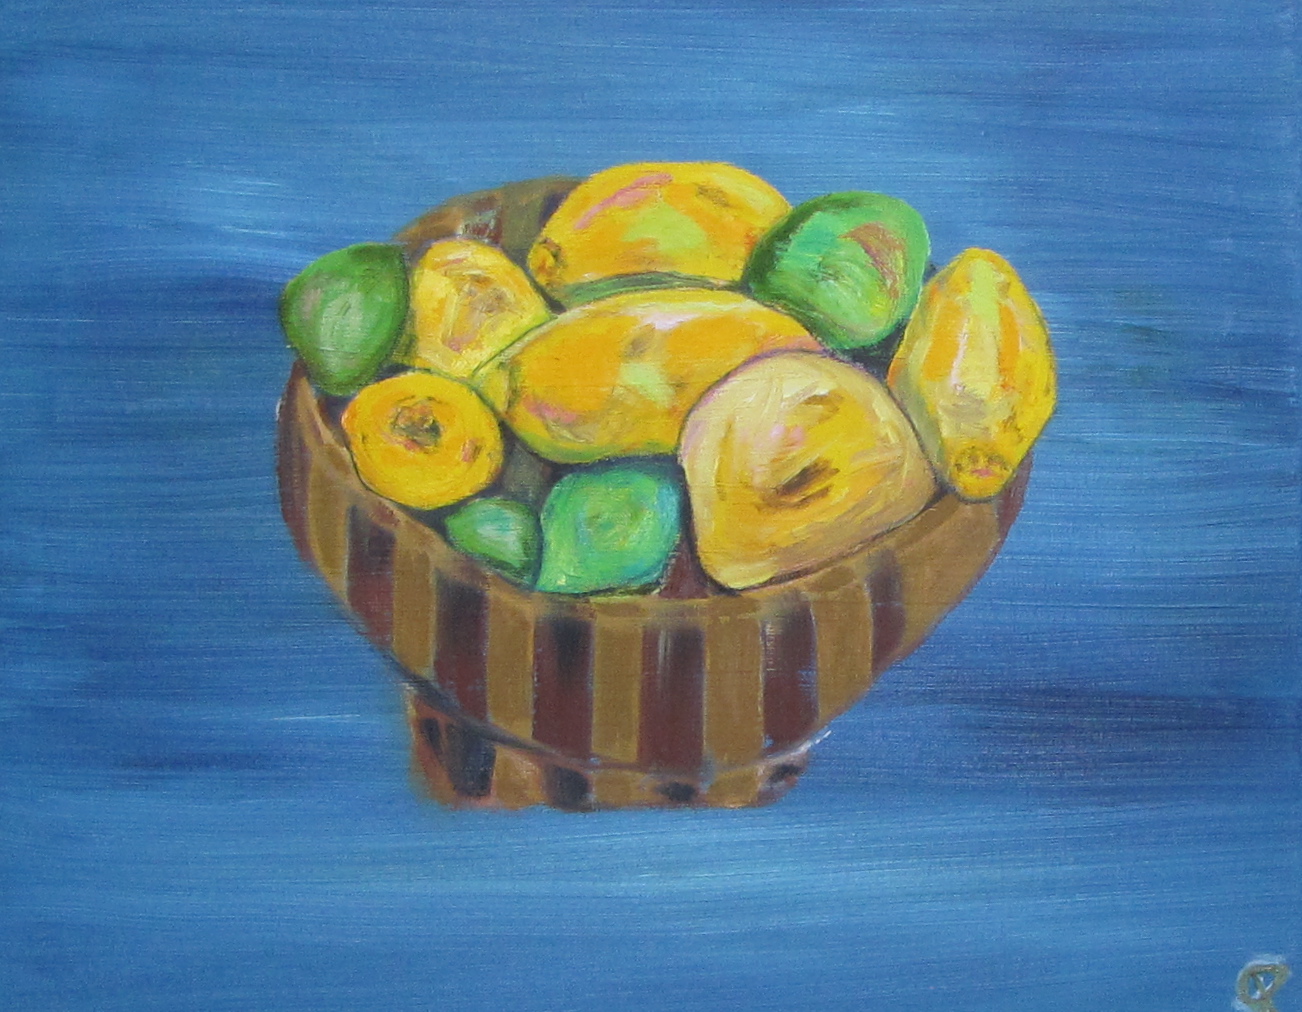 Lemons and Limes with Grapefruit, Russell Steven Powell oil on canvas, 20x16